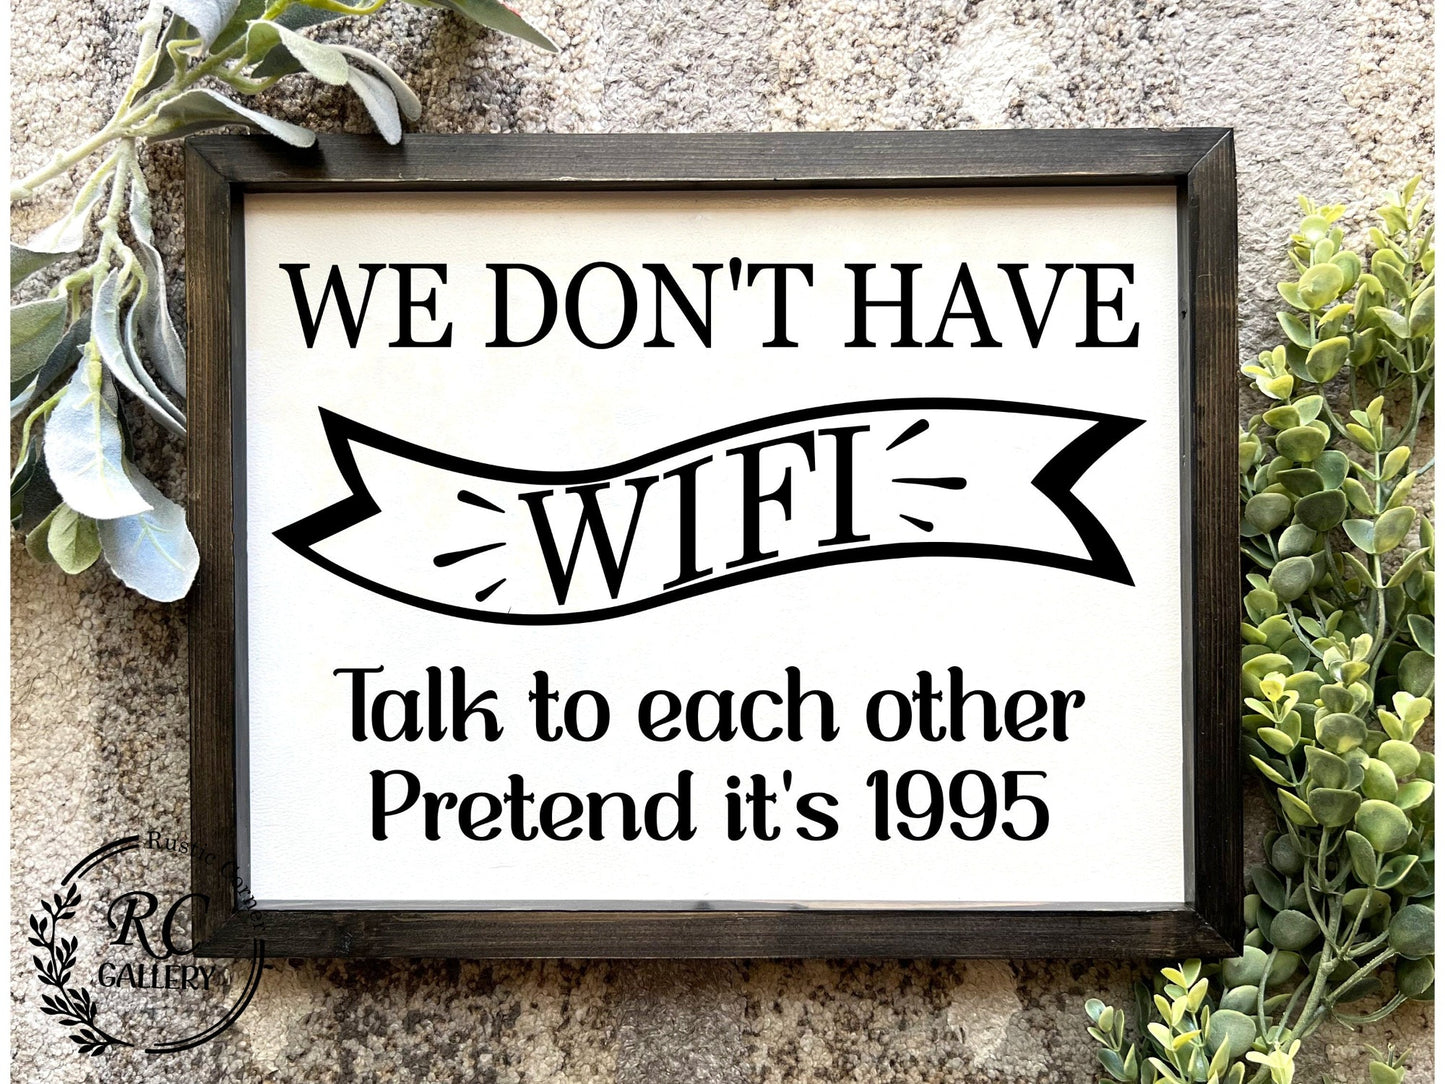 We don't have WIFI pretend It's 1995 wood sign.